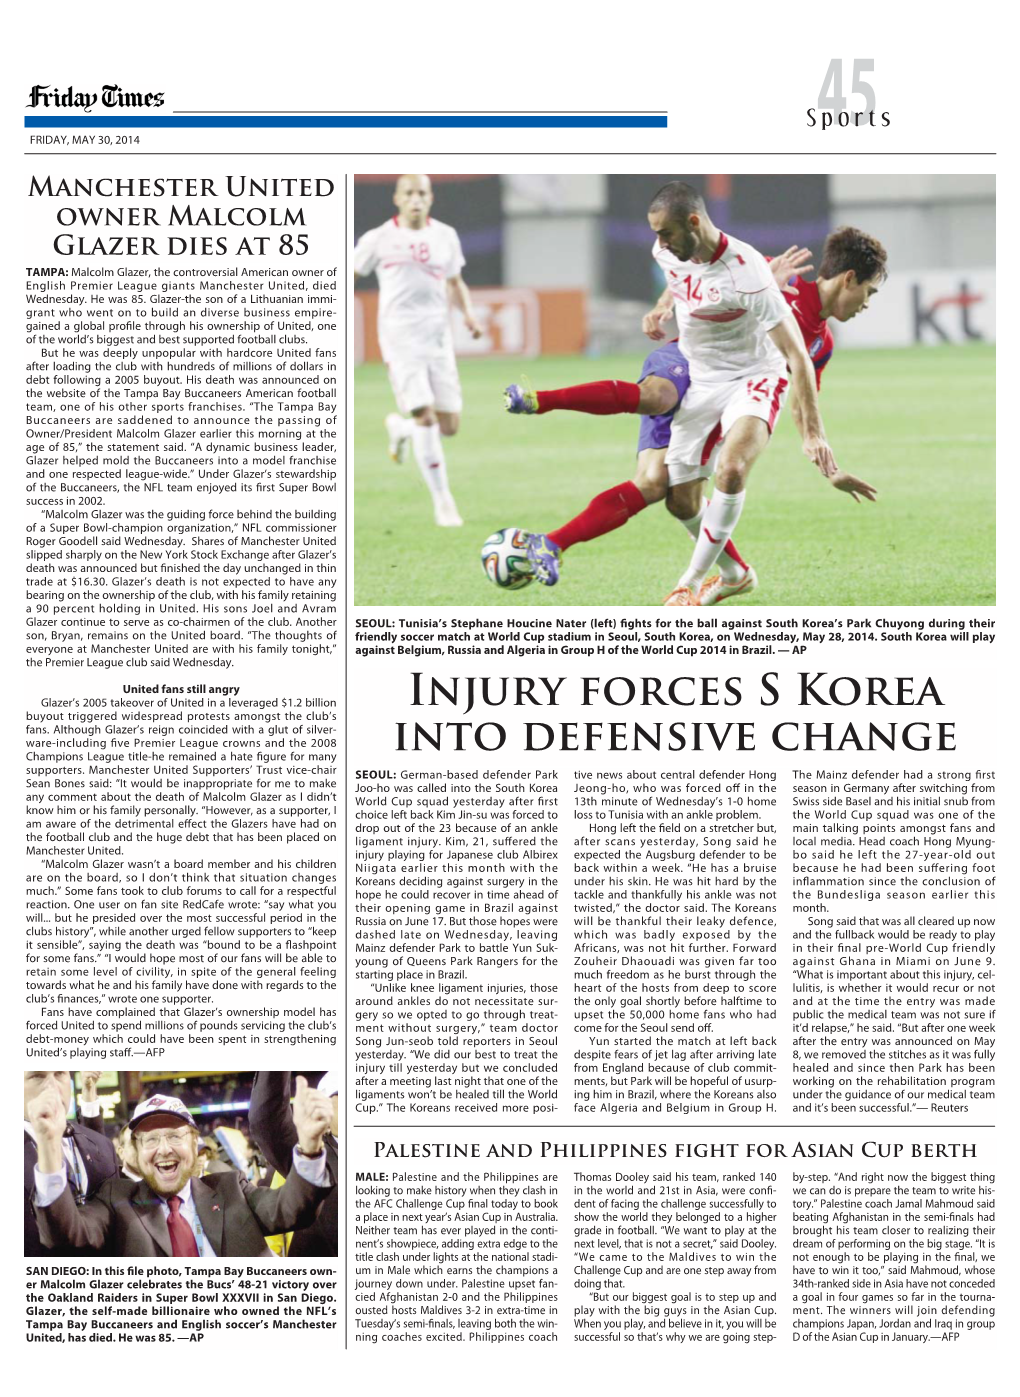 Injury Forces S Korea Into Defensive Change